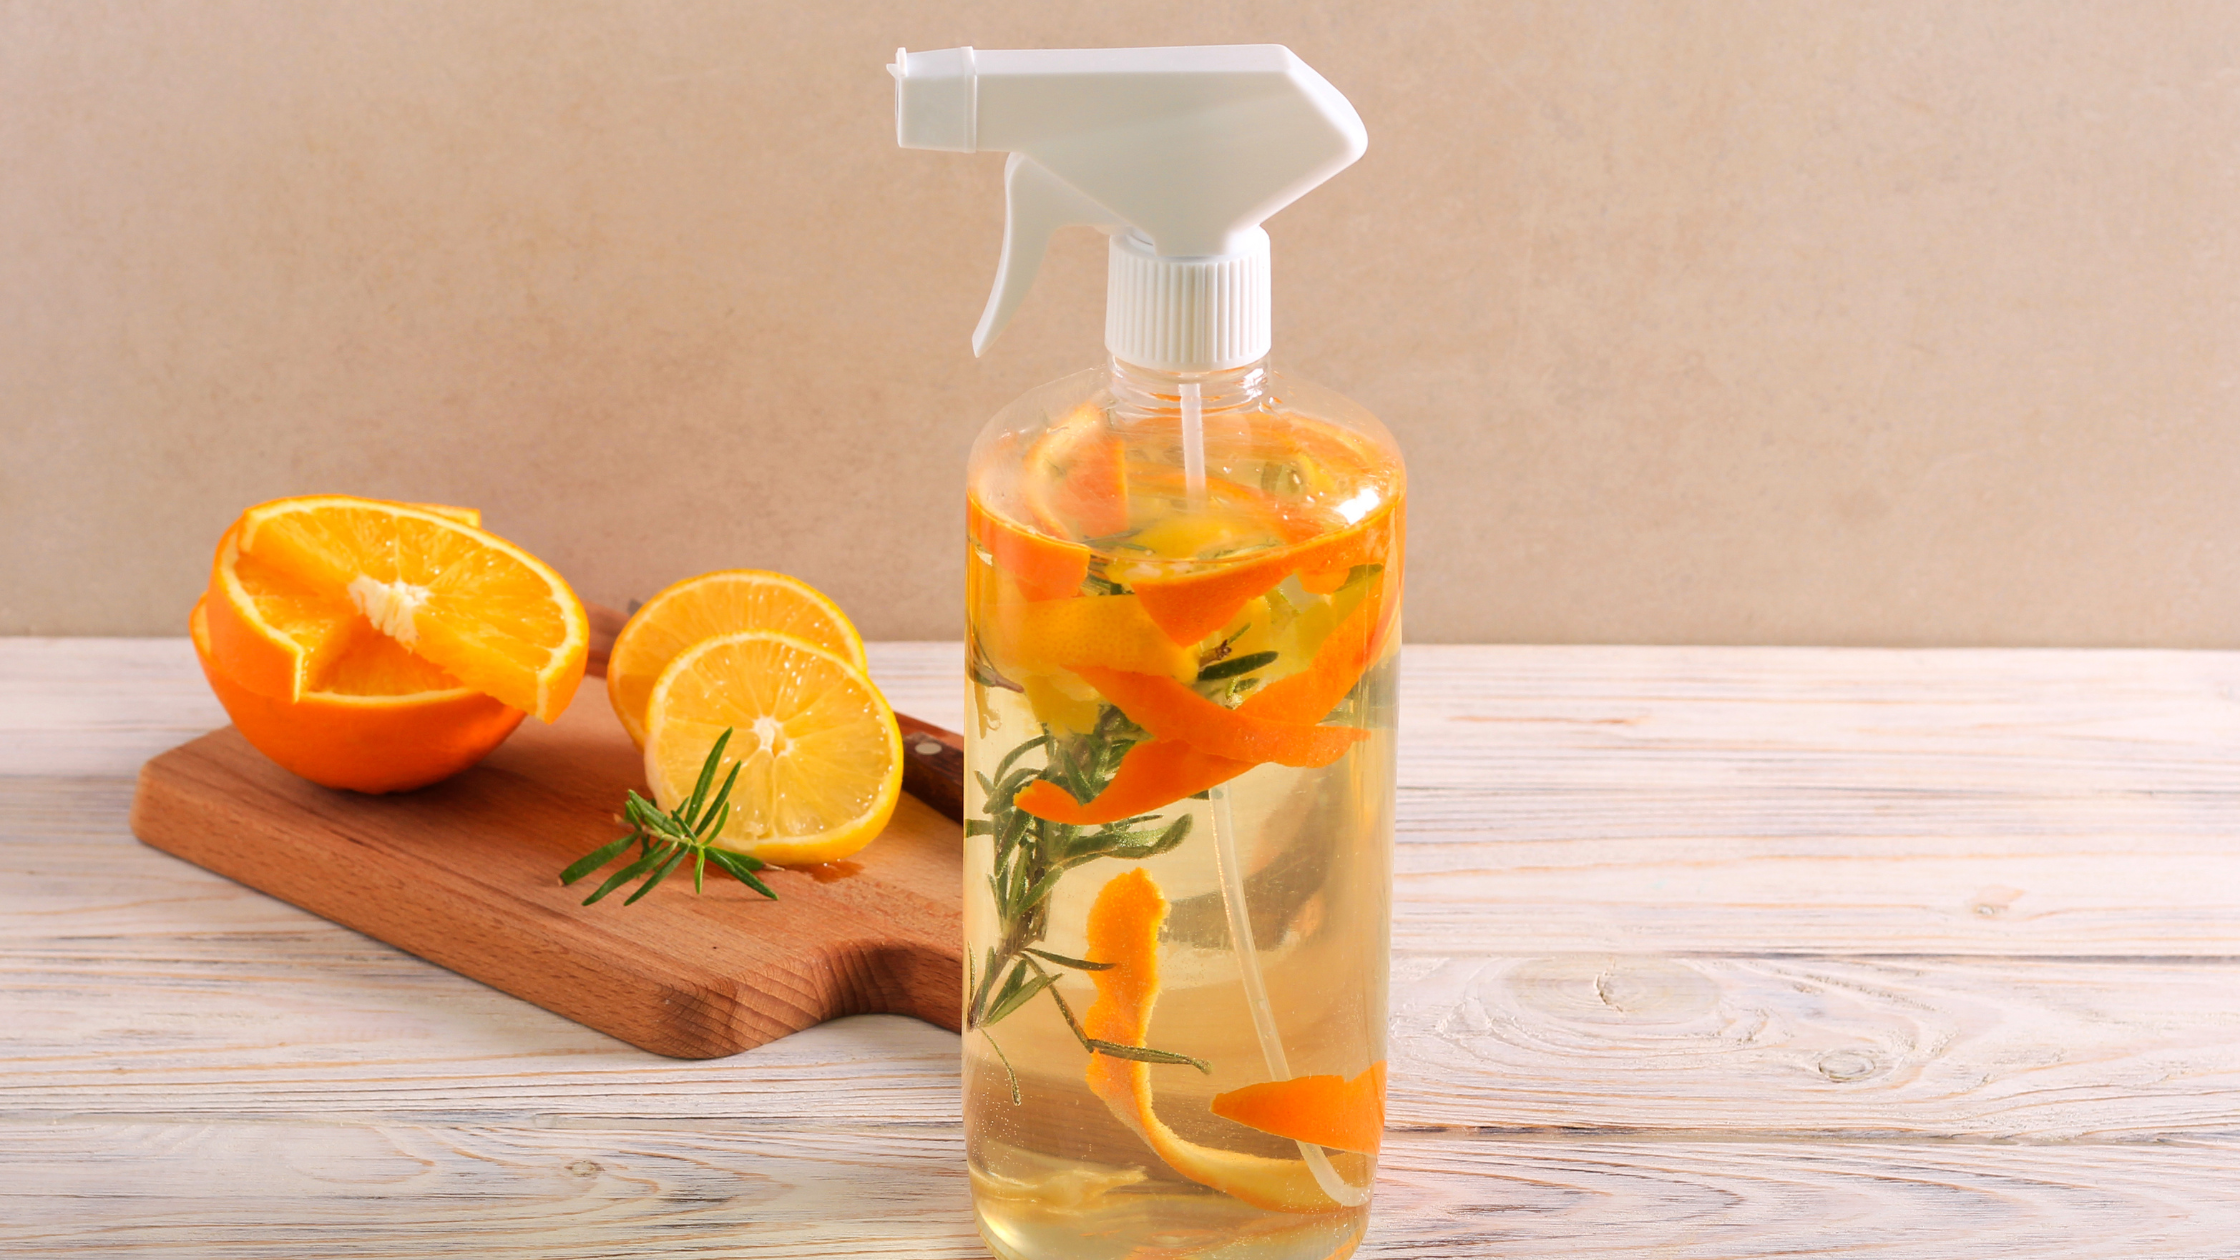 homemade cleaning spray with oranges in a clear reusable spray bottle